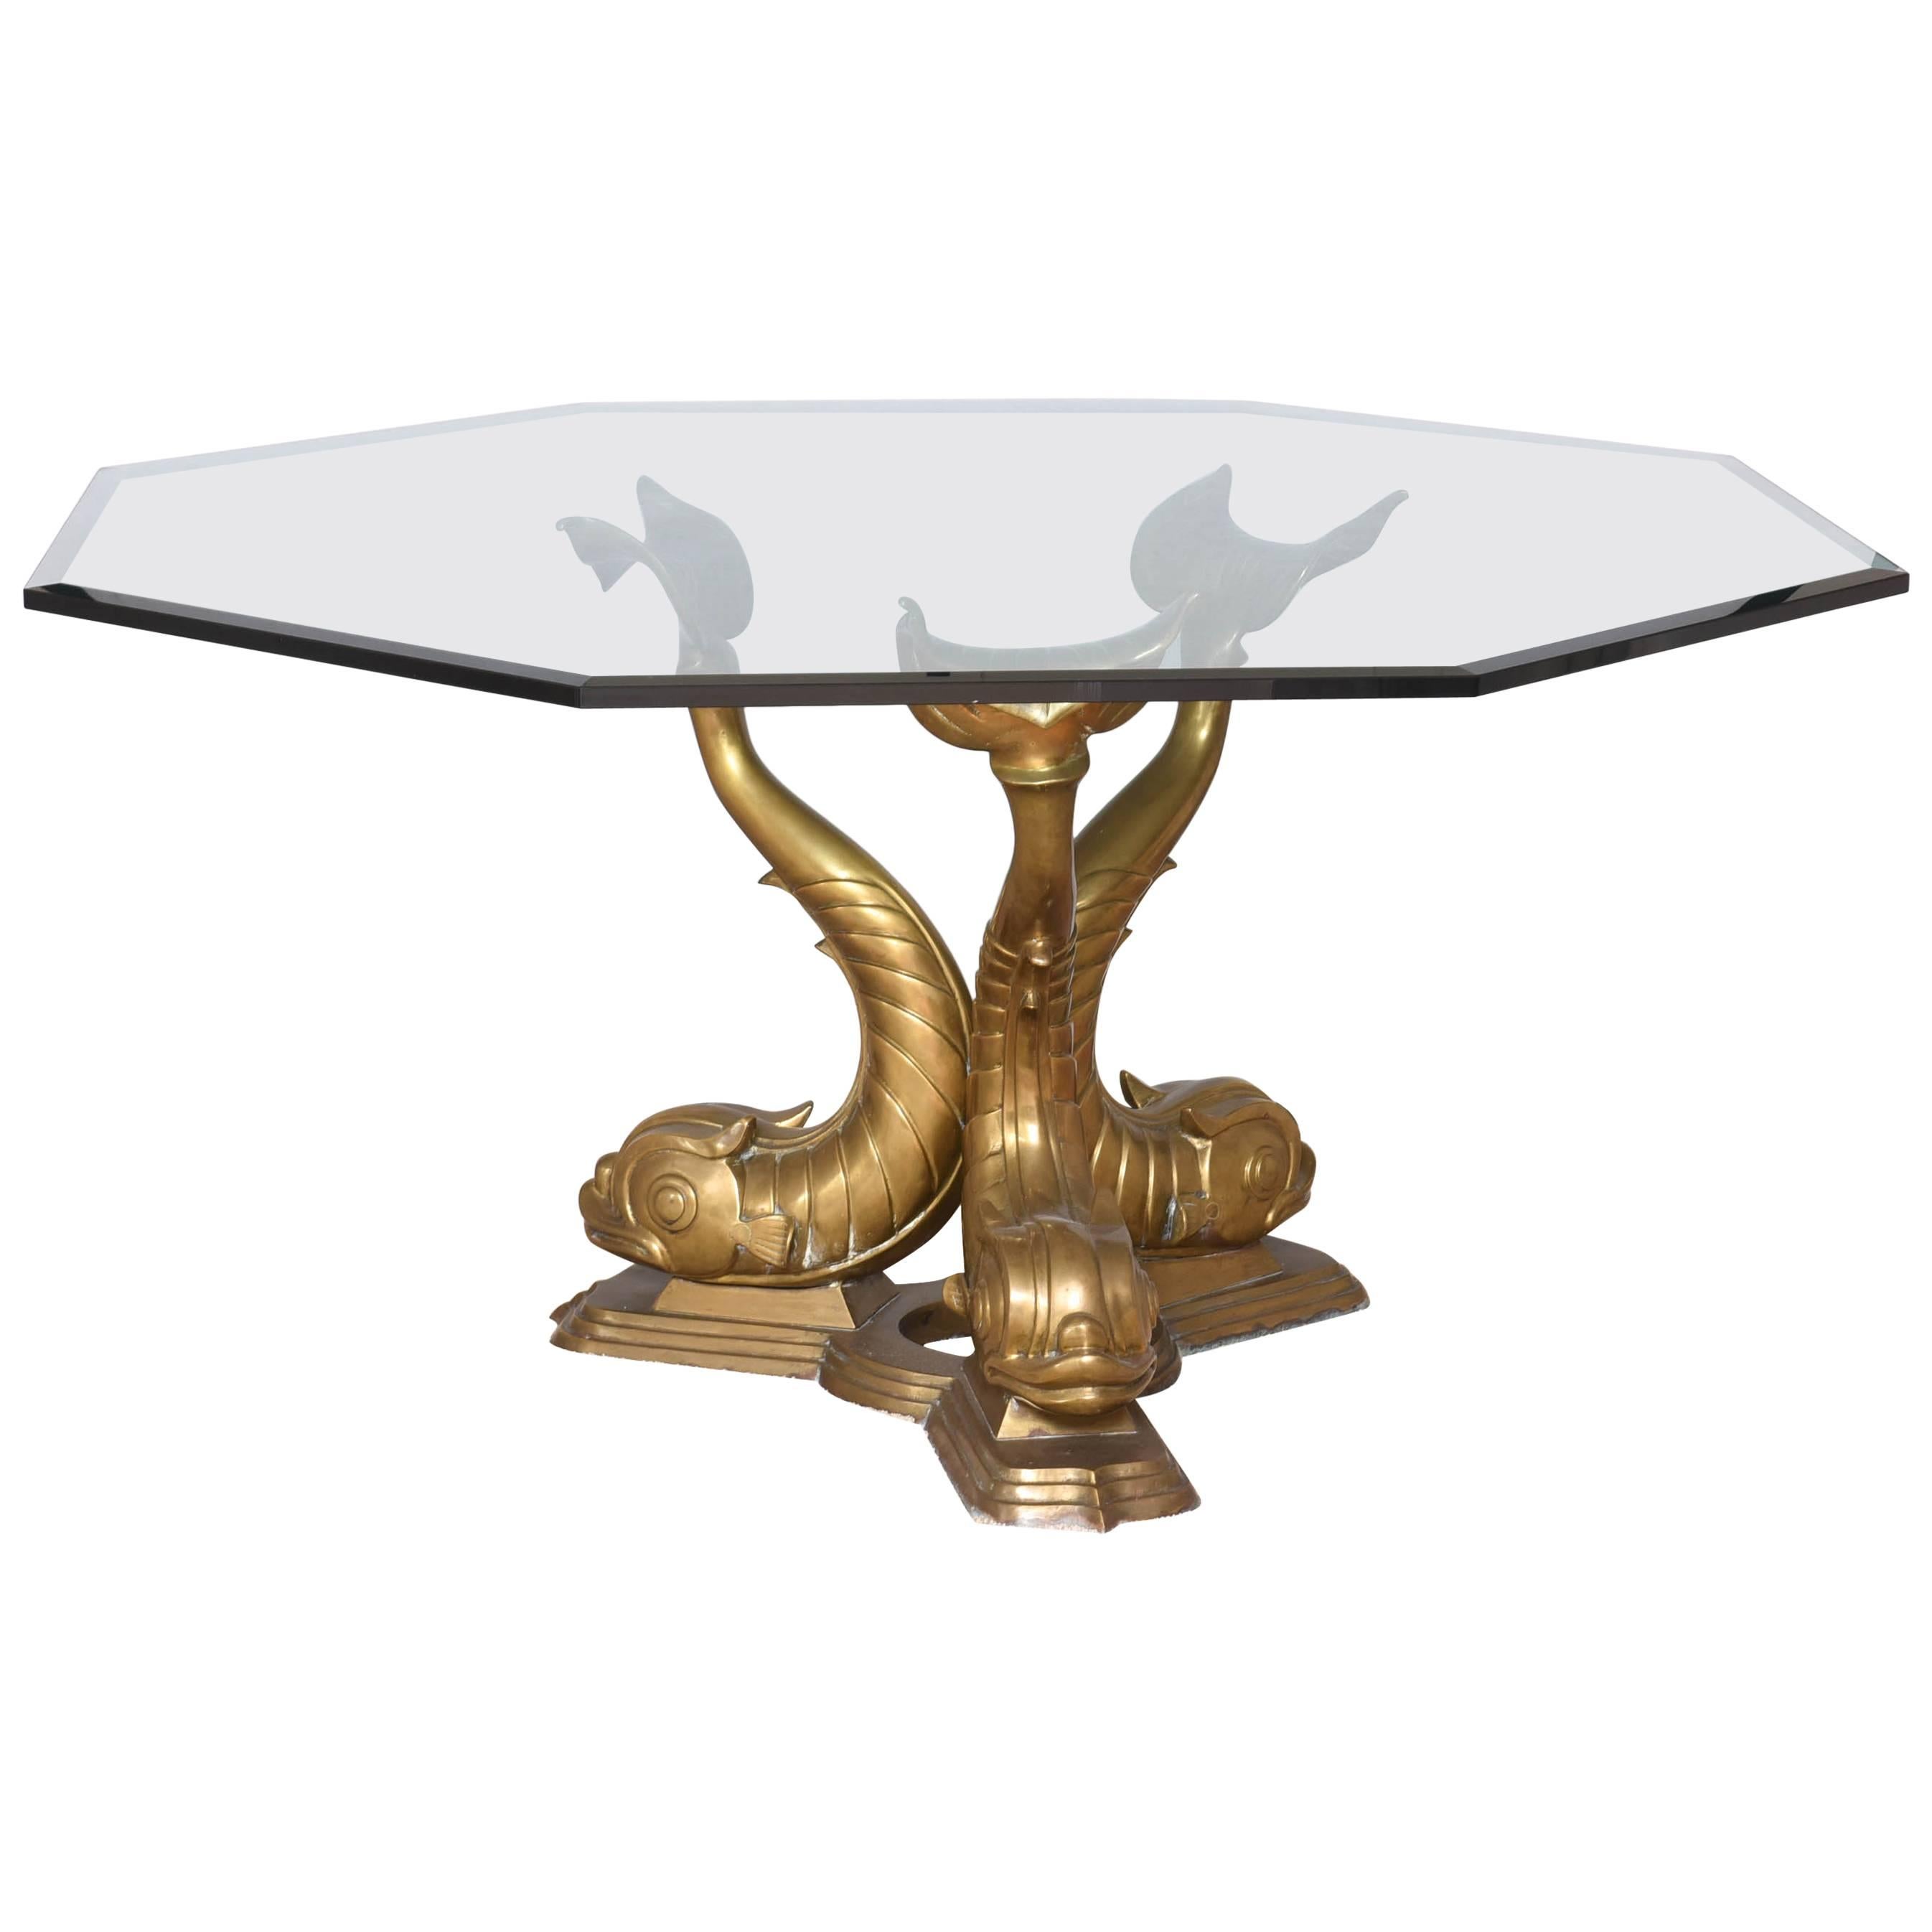 Hollywood-Regency Style Octagonal Glass Dining Table with Dolphin Base